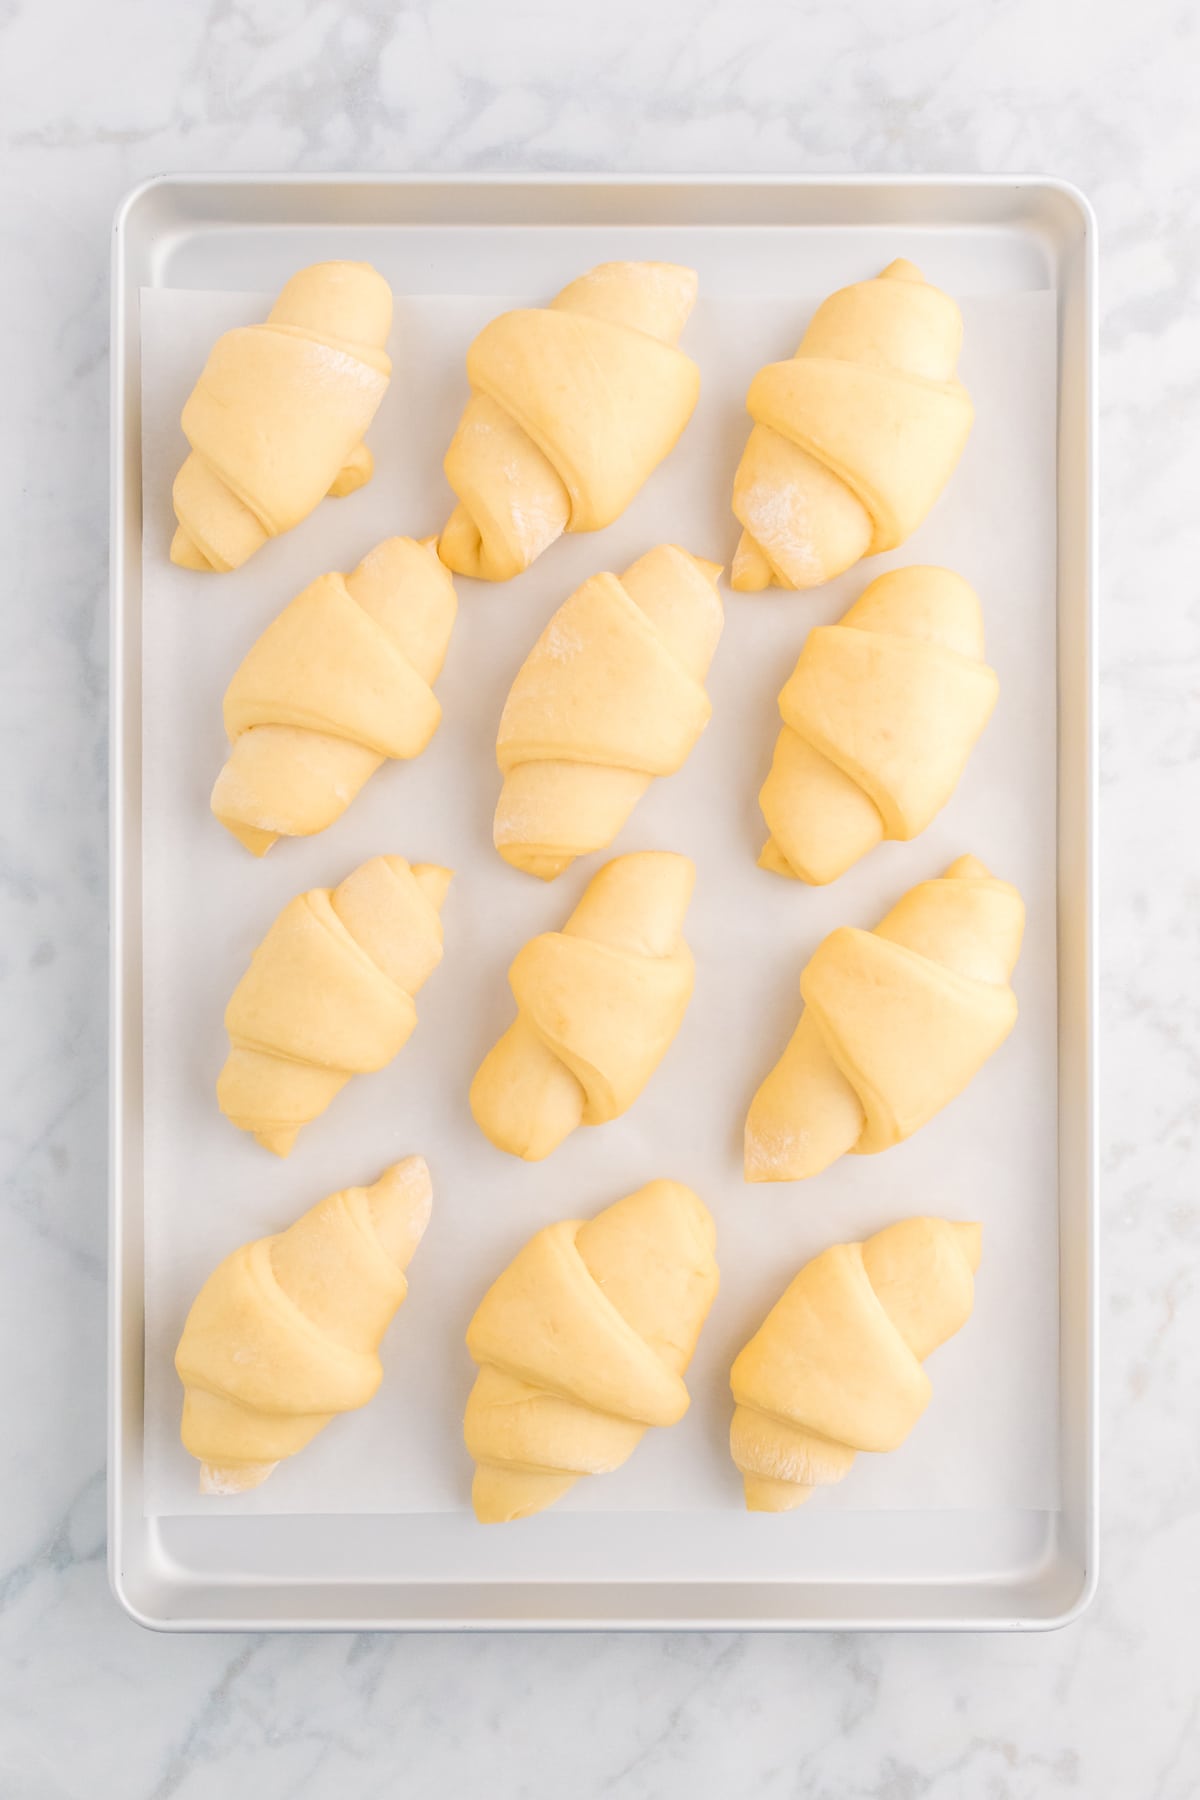 Unbaked crescent rolls on a baking sheet